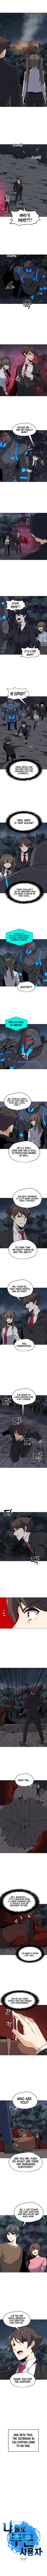 solo-spell-caster-chap-31-1